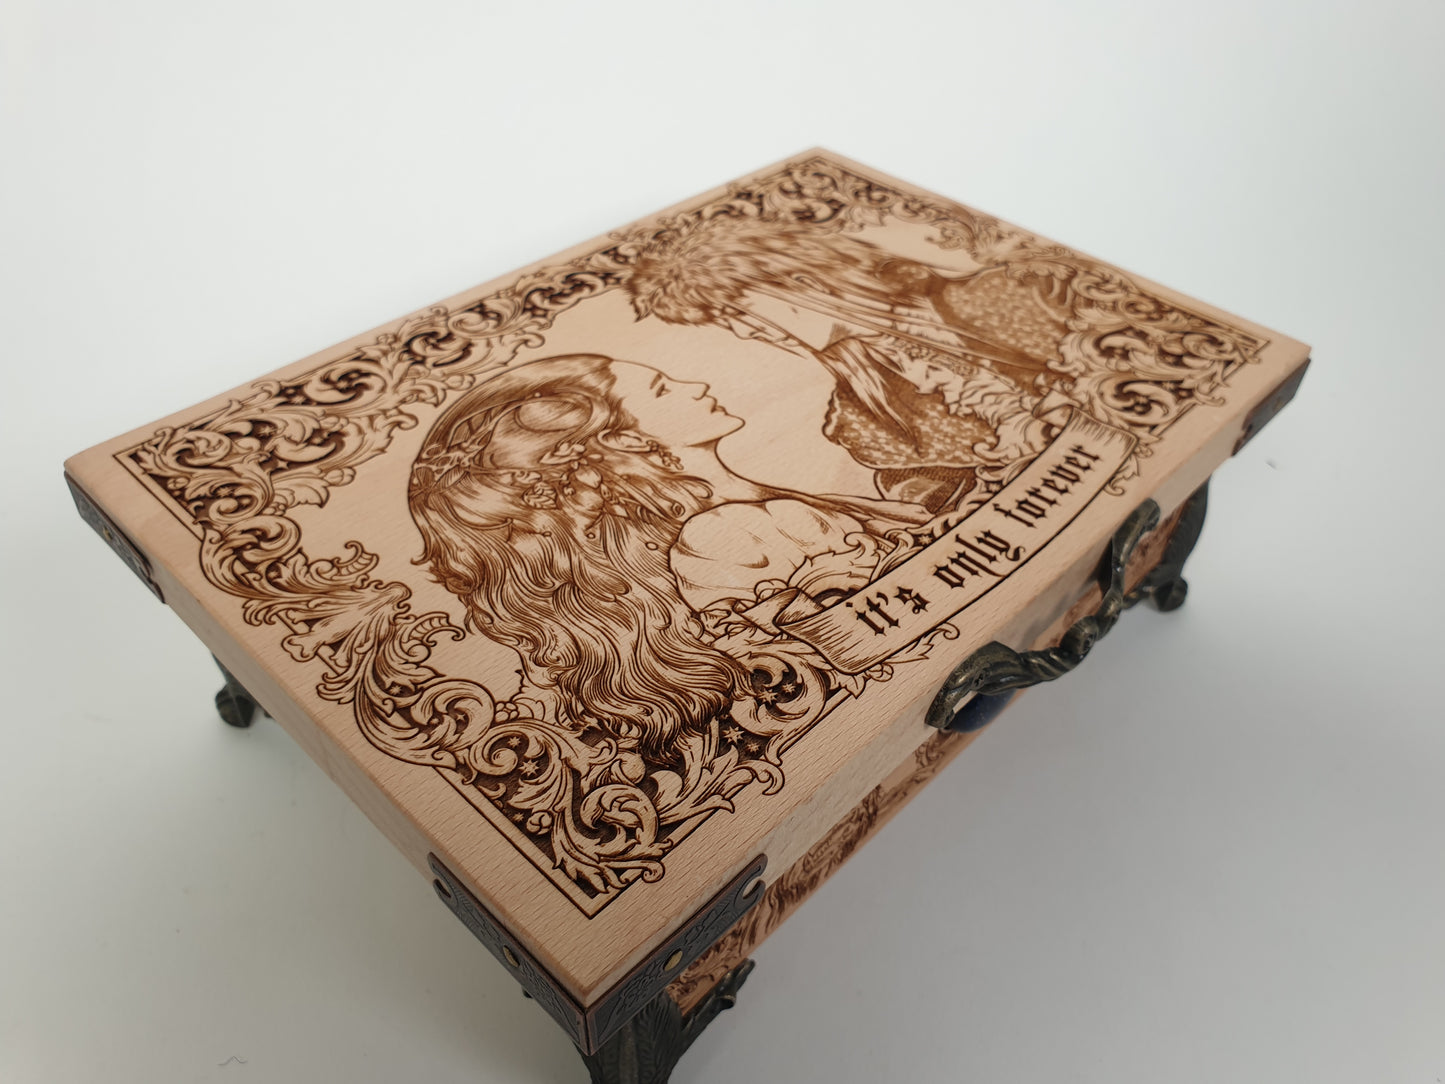 labyrinth movie art gift made of wood